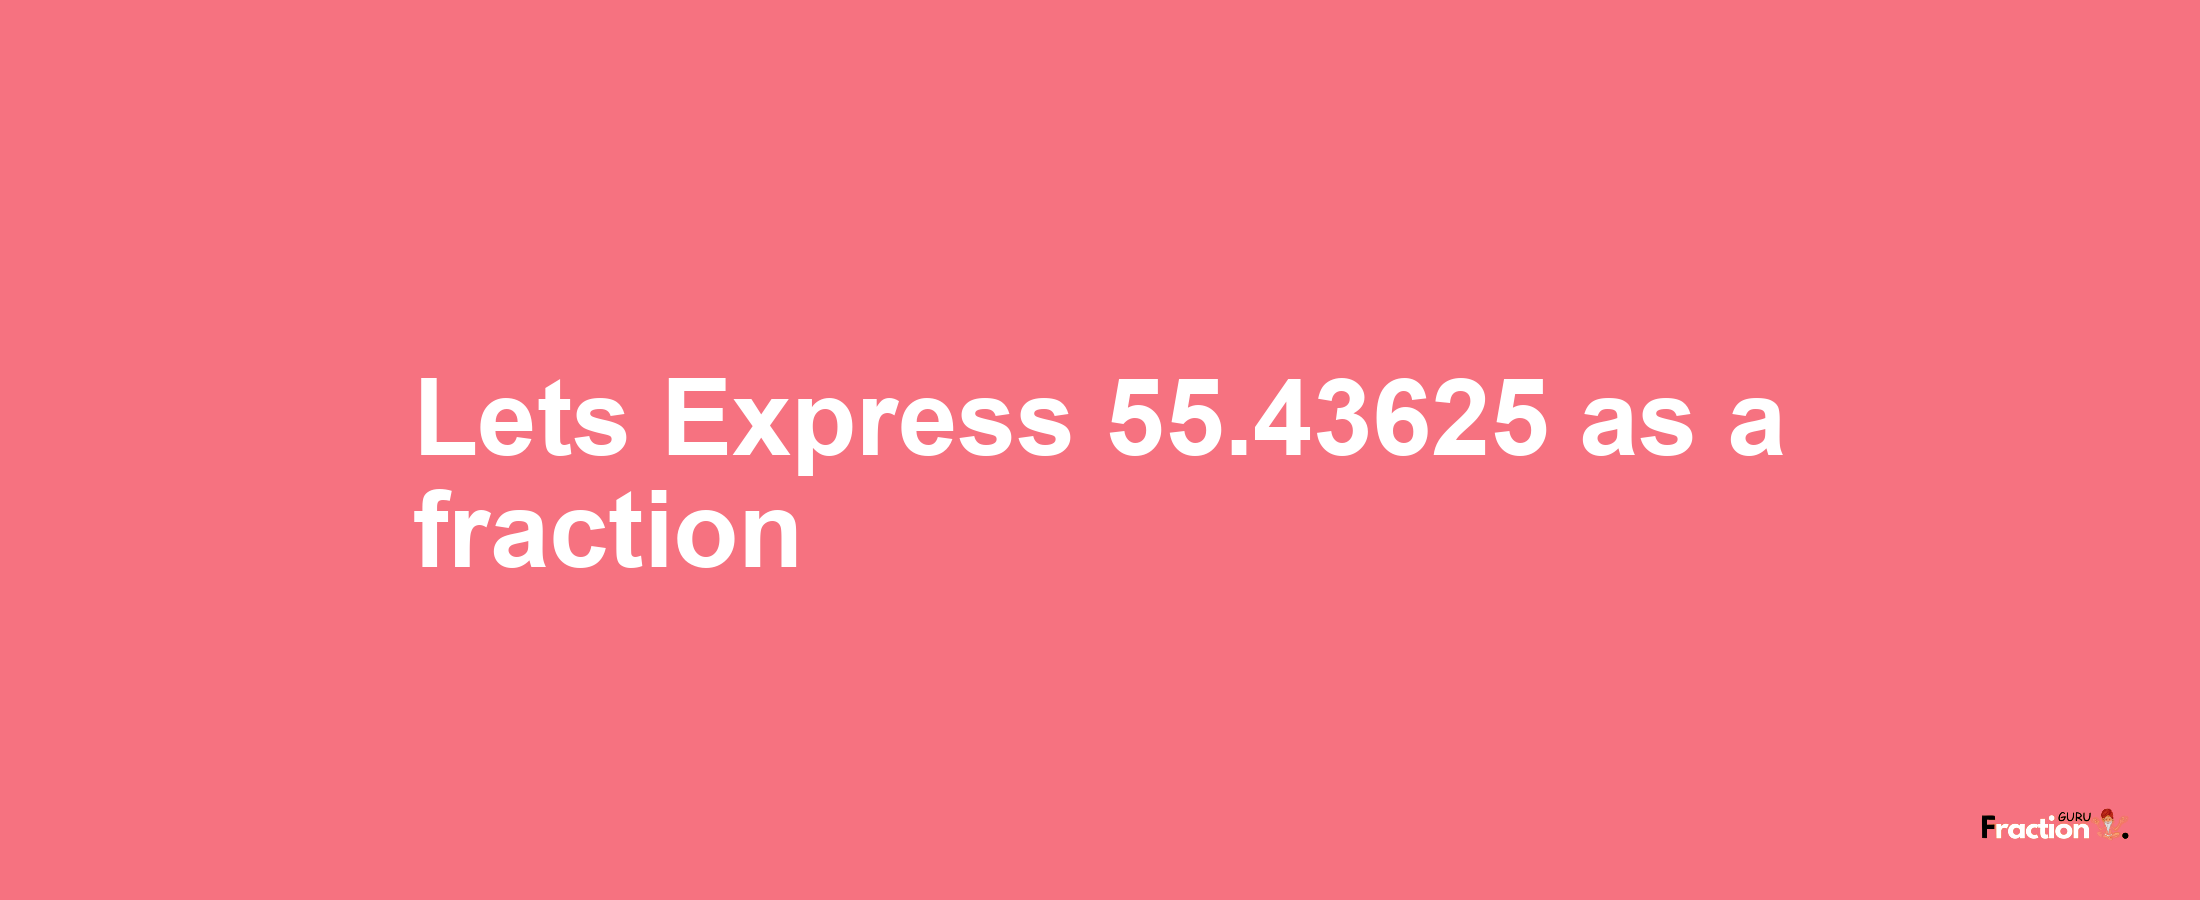 Lets Express 55.43625 as afraction